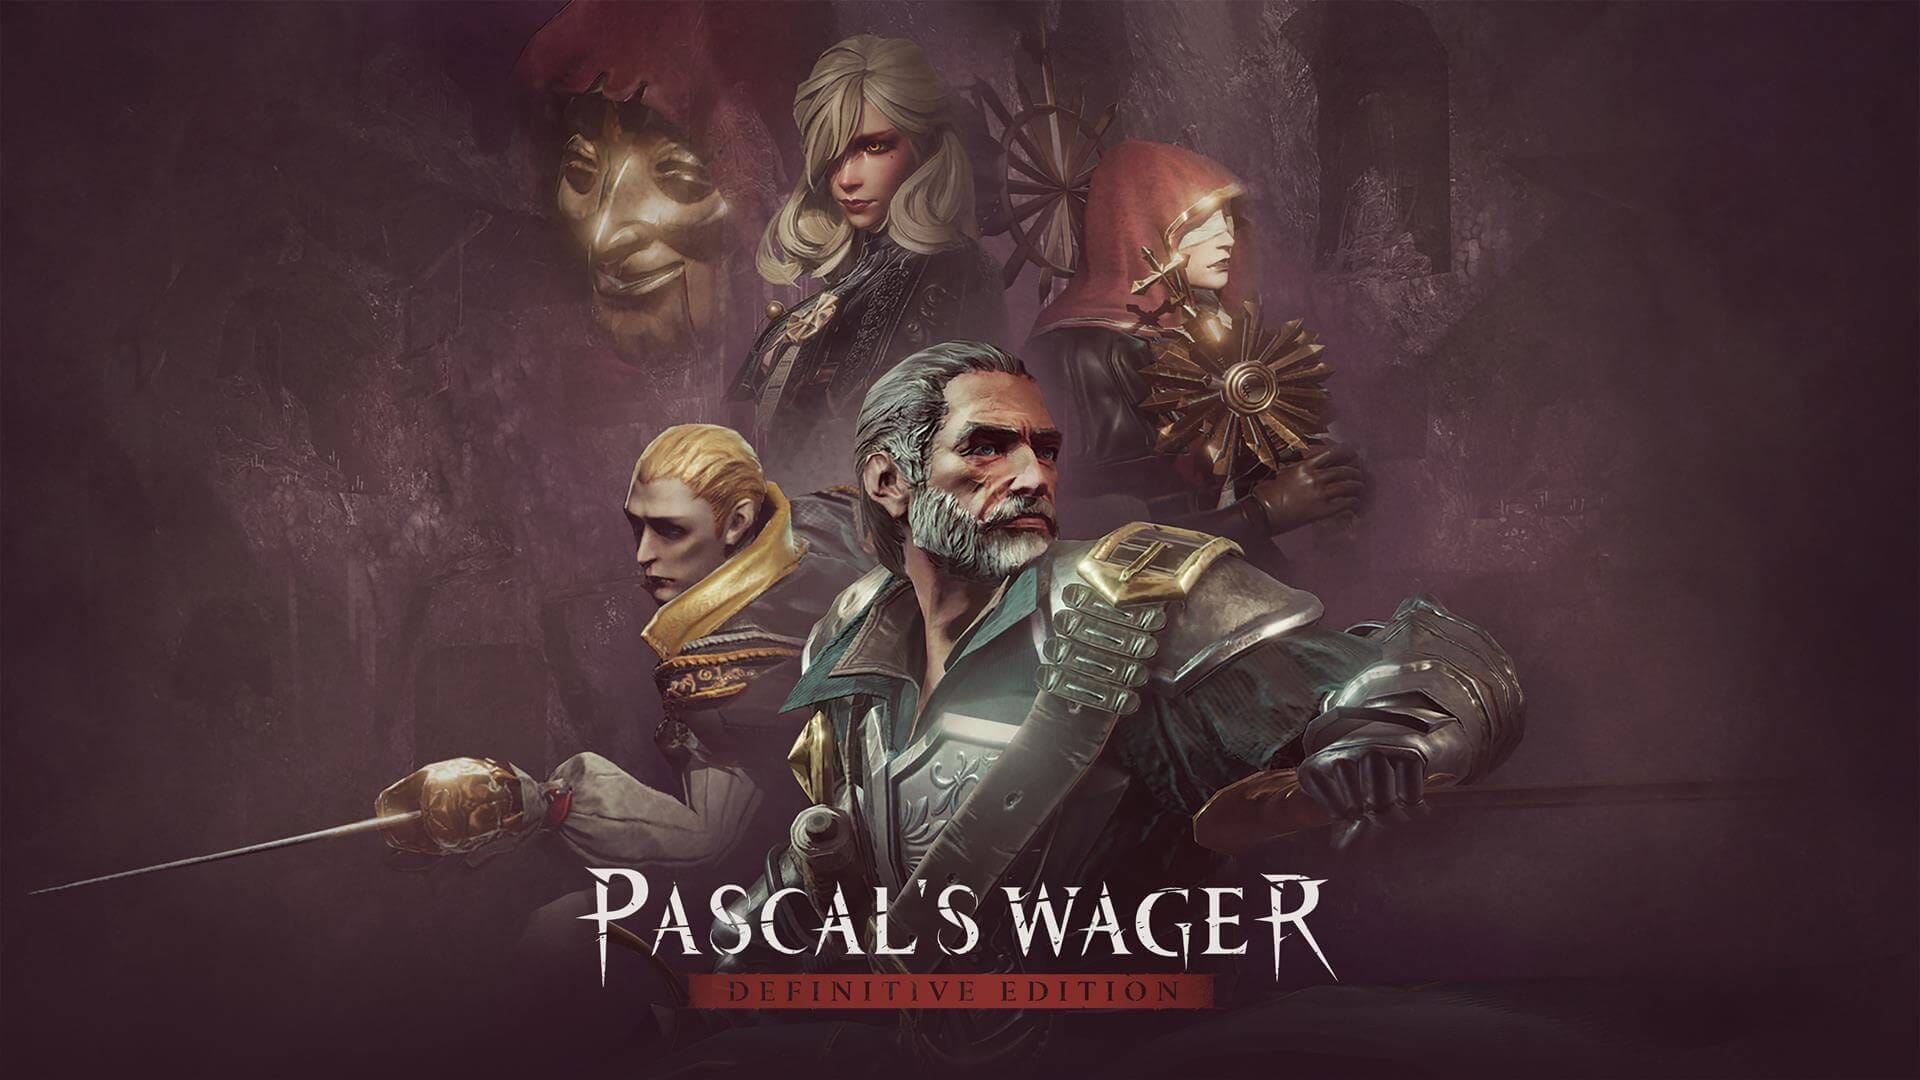 Artwork depicting the main characters in Pascal's Wager Definitive Edition